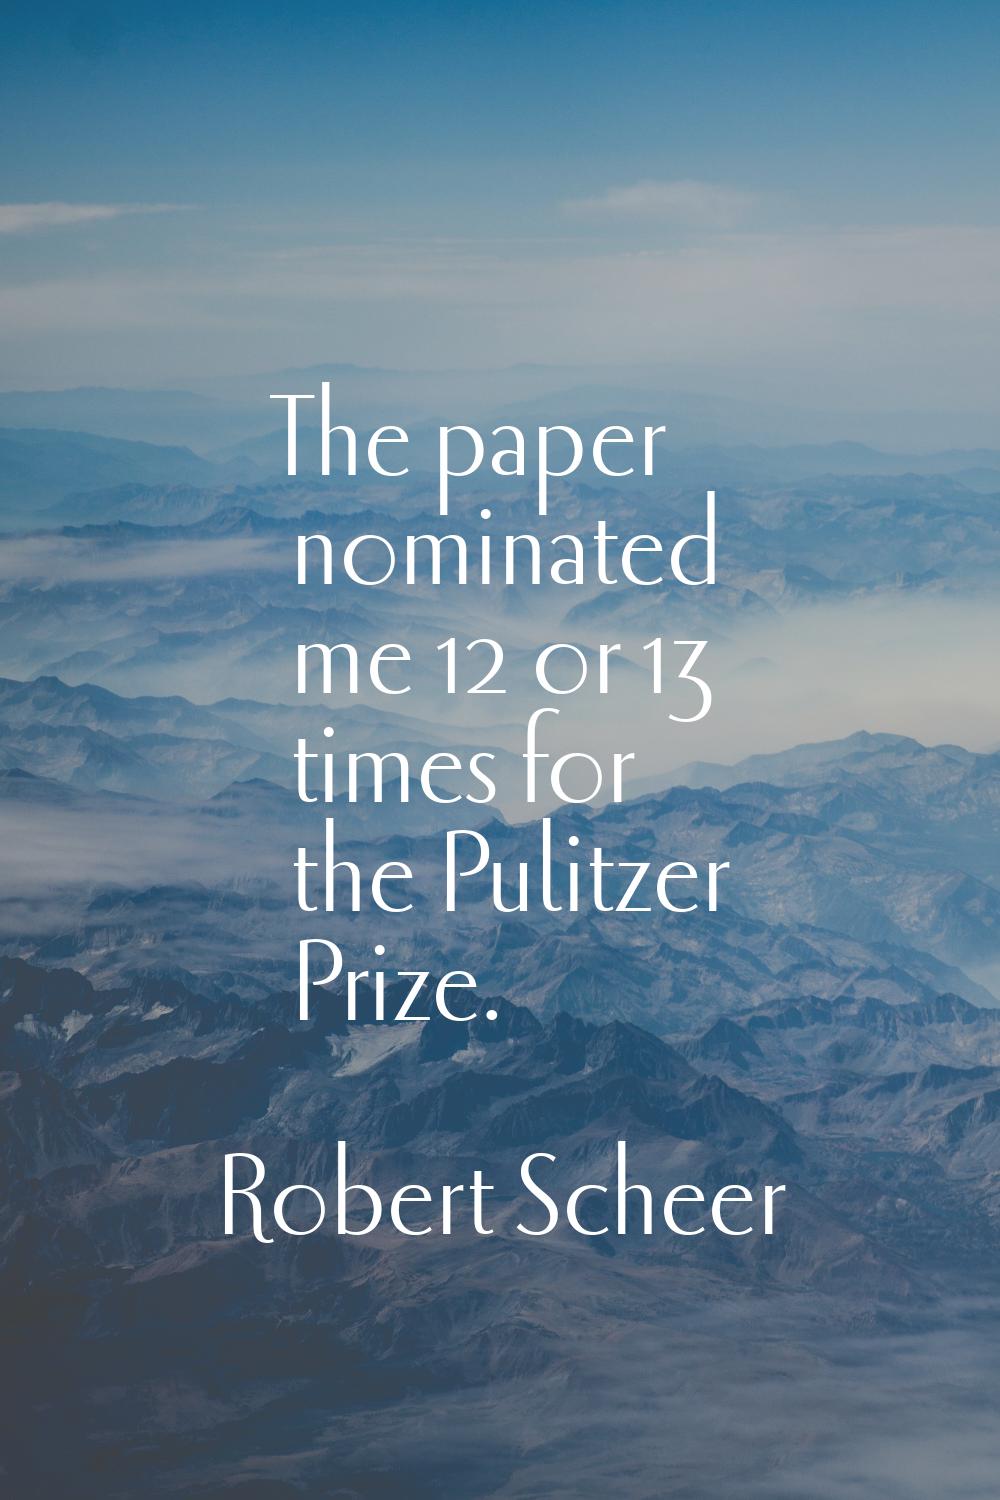 The paper nominated me 12 or 13 times for the Pulitzer Prize.